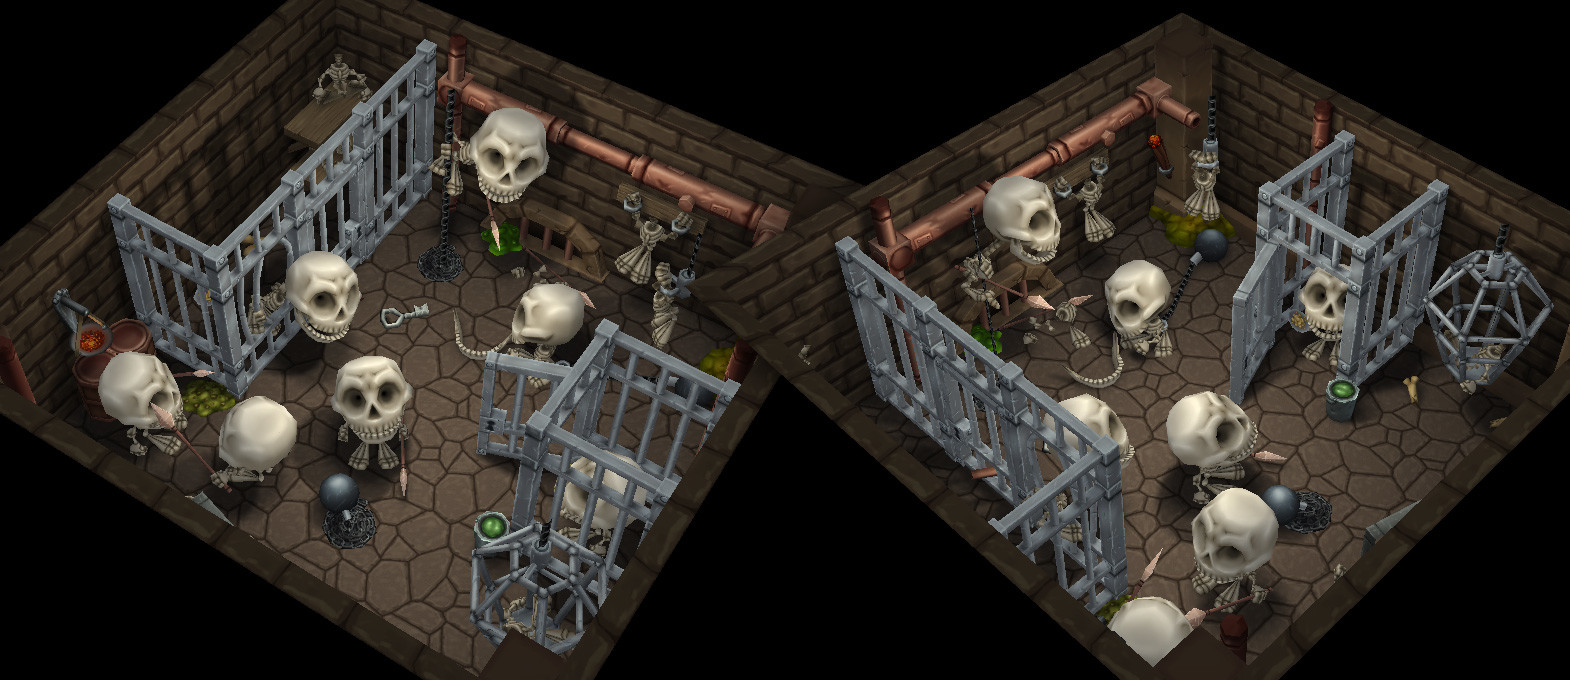 Jail with Skeletons